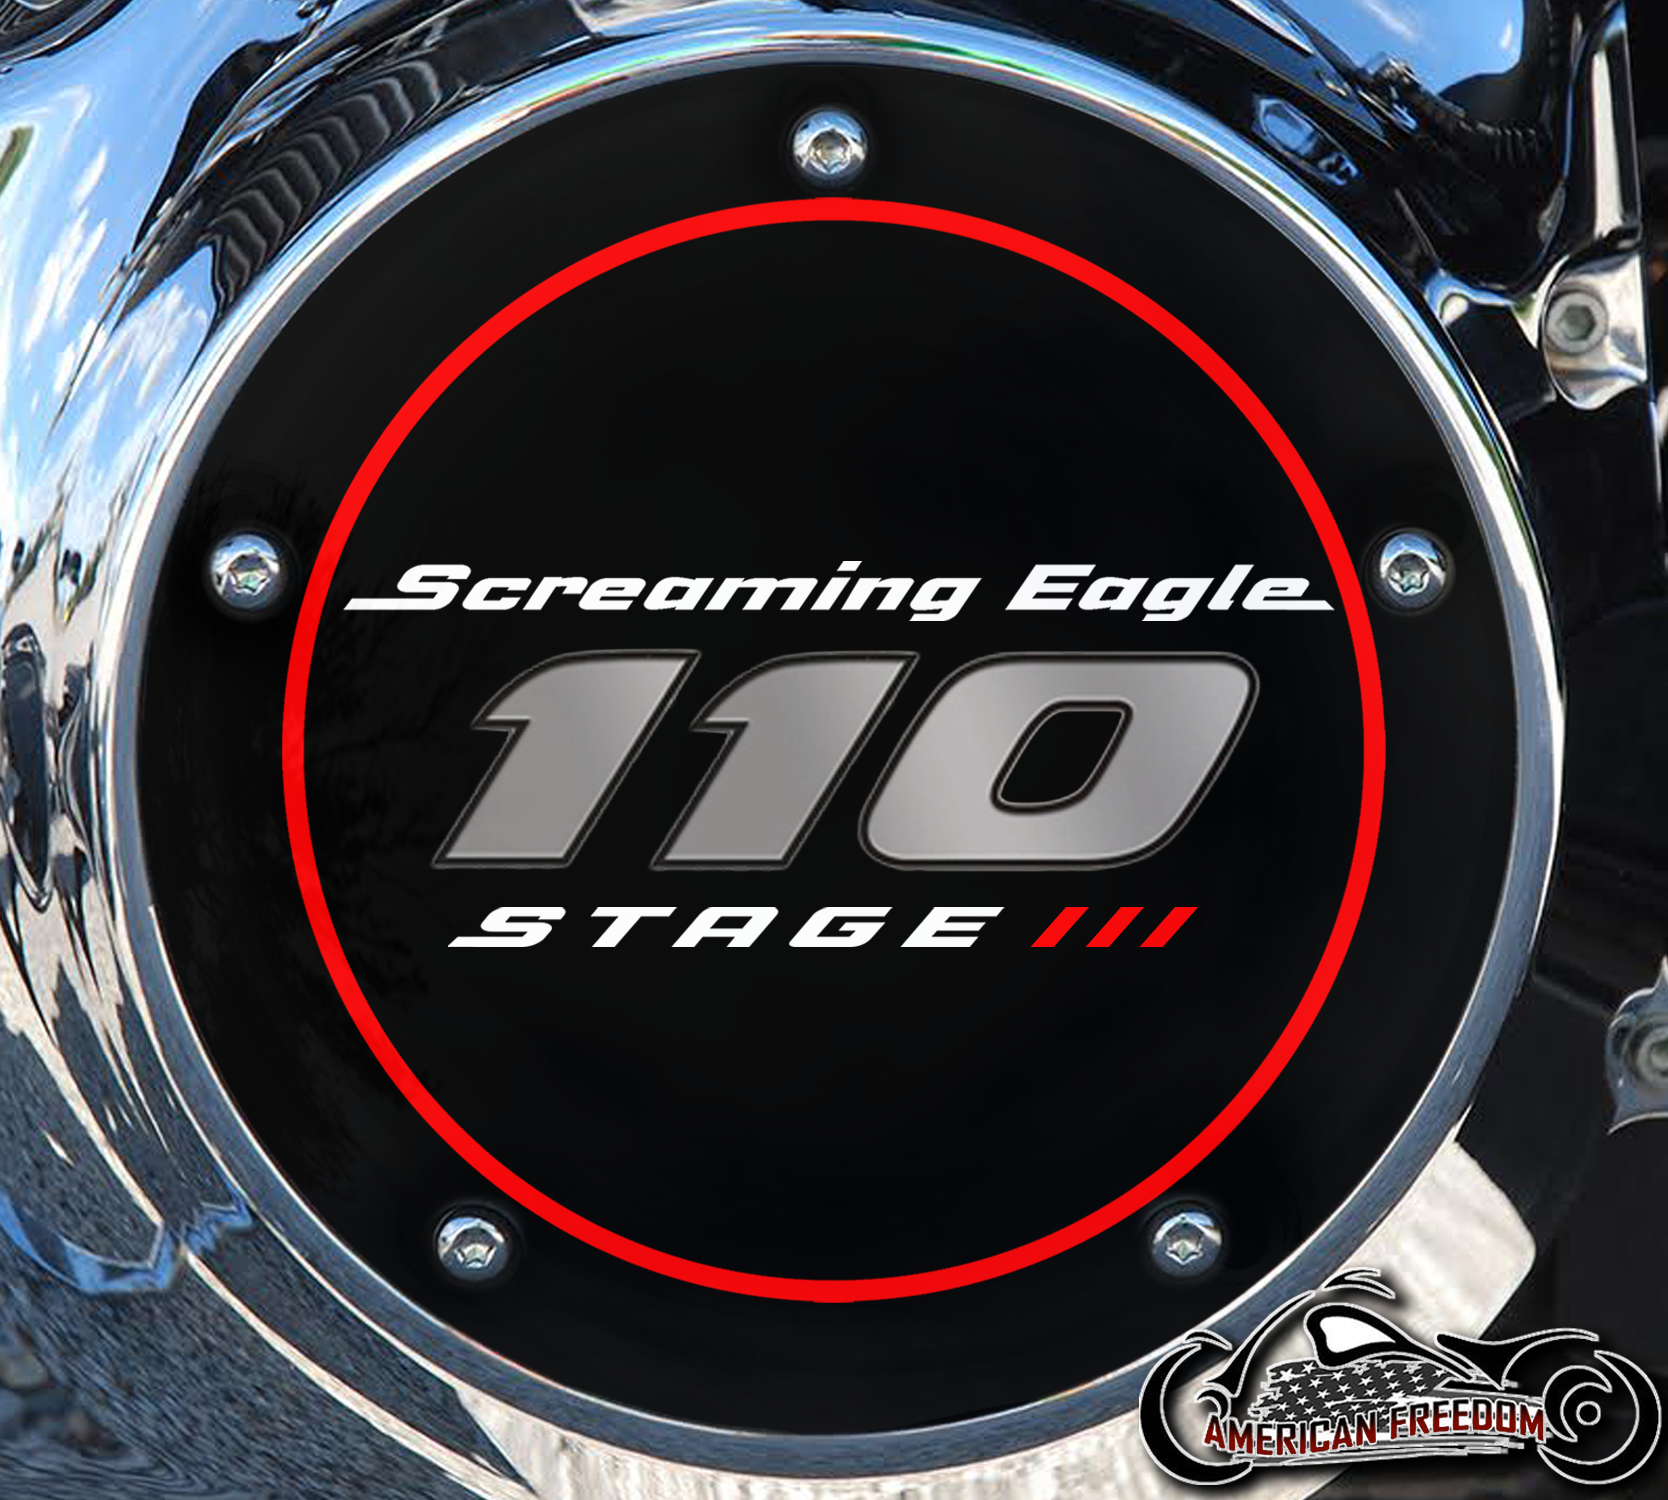 Screaming Eagle Stage III 110 Ring Derby Cover